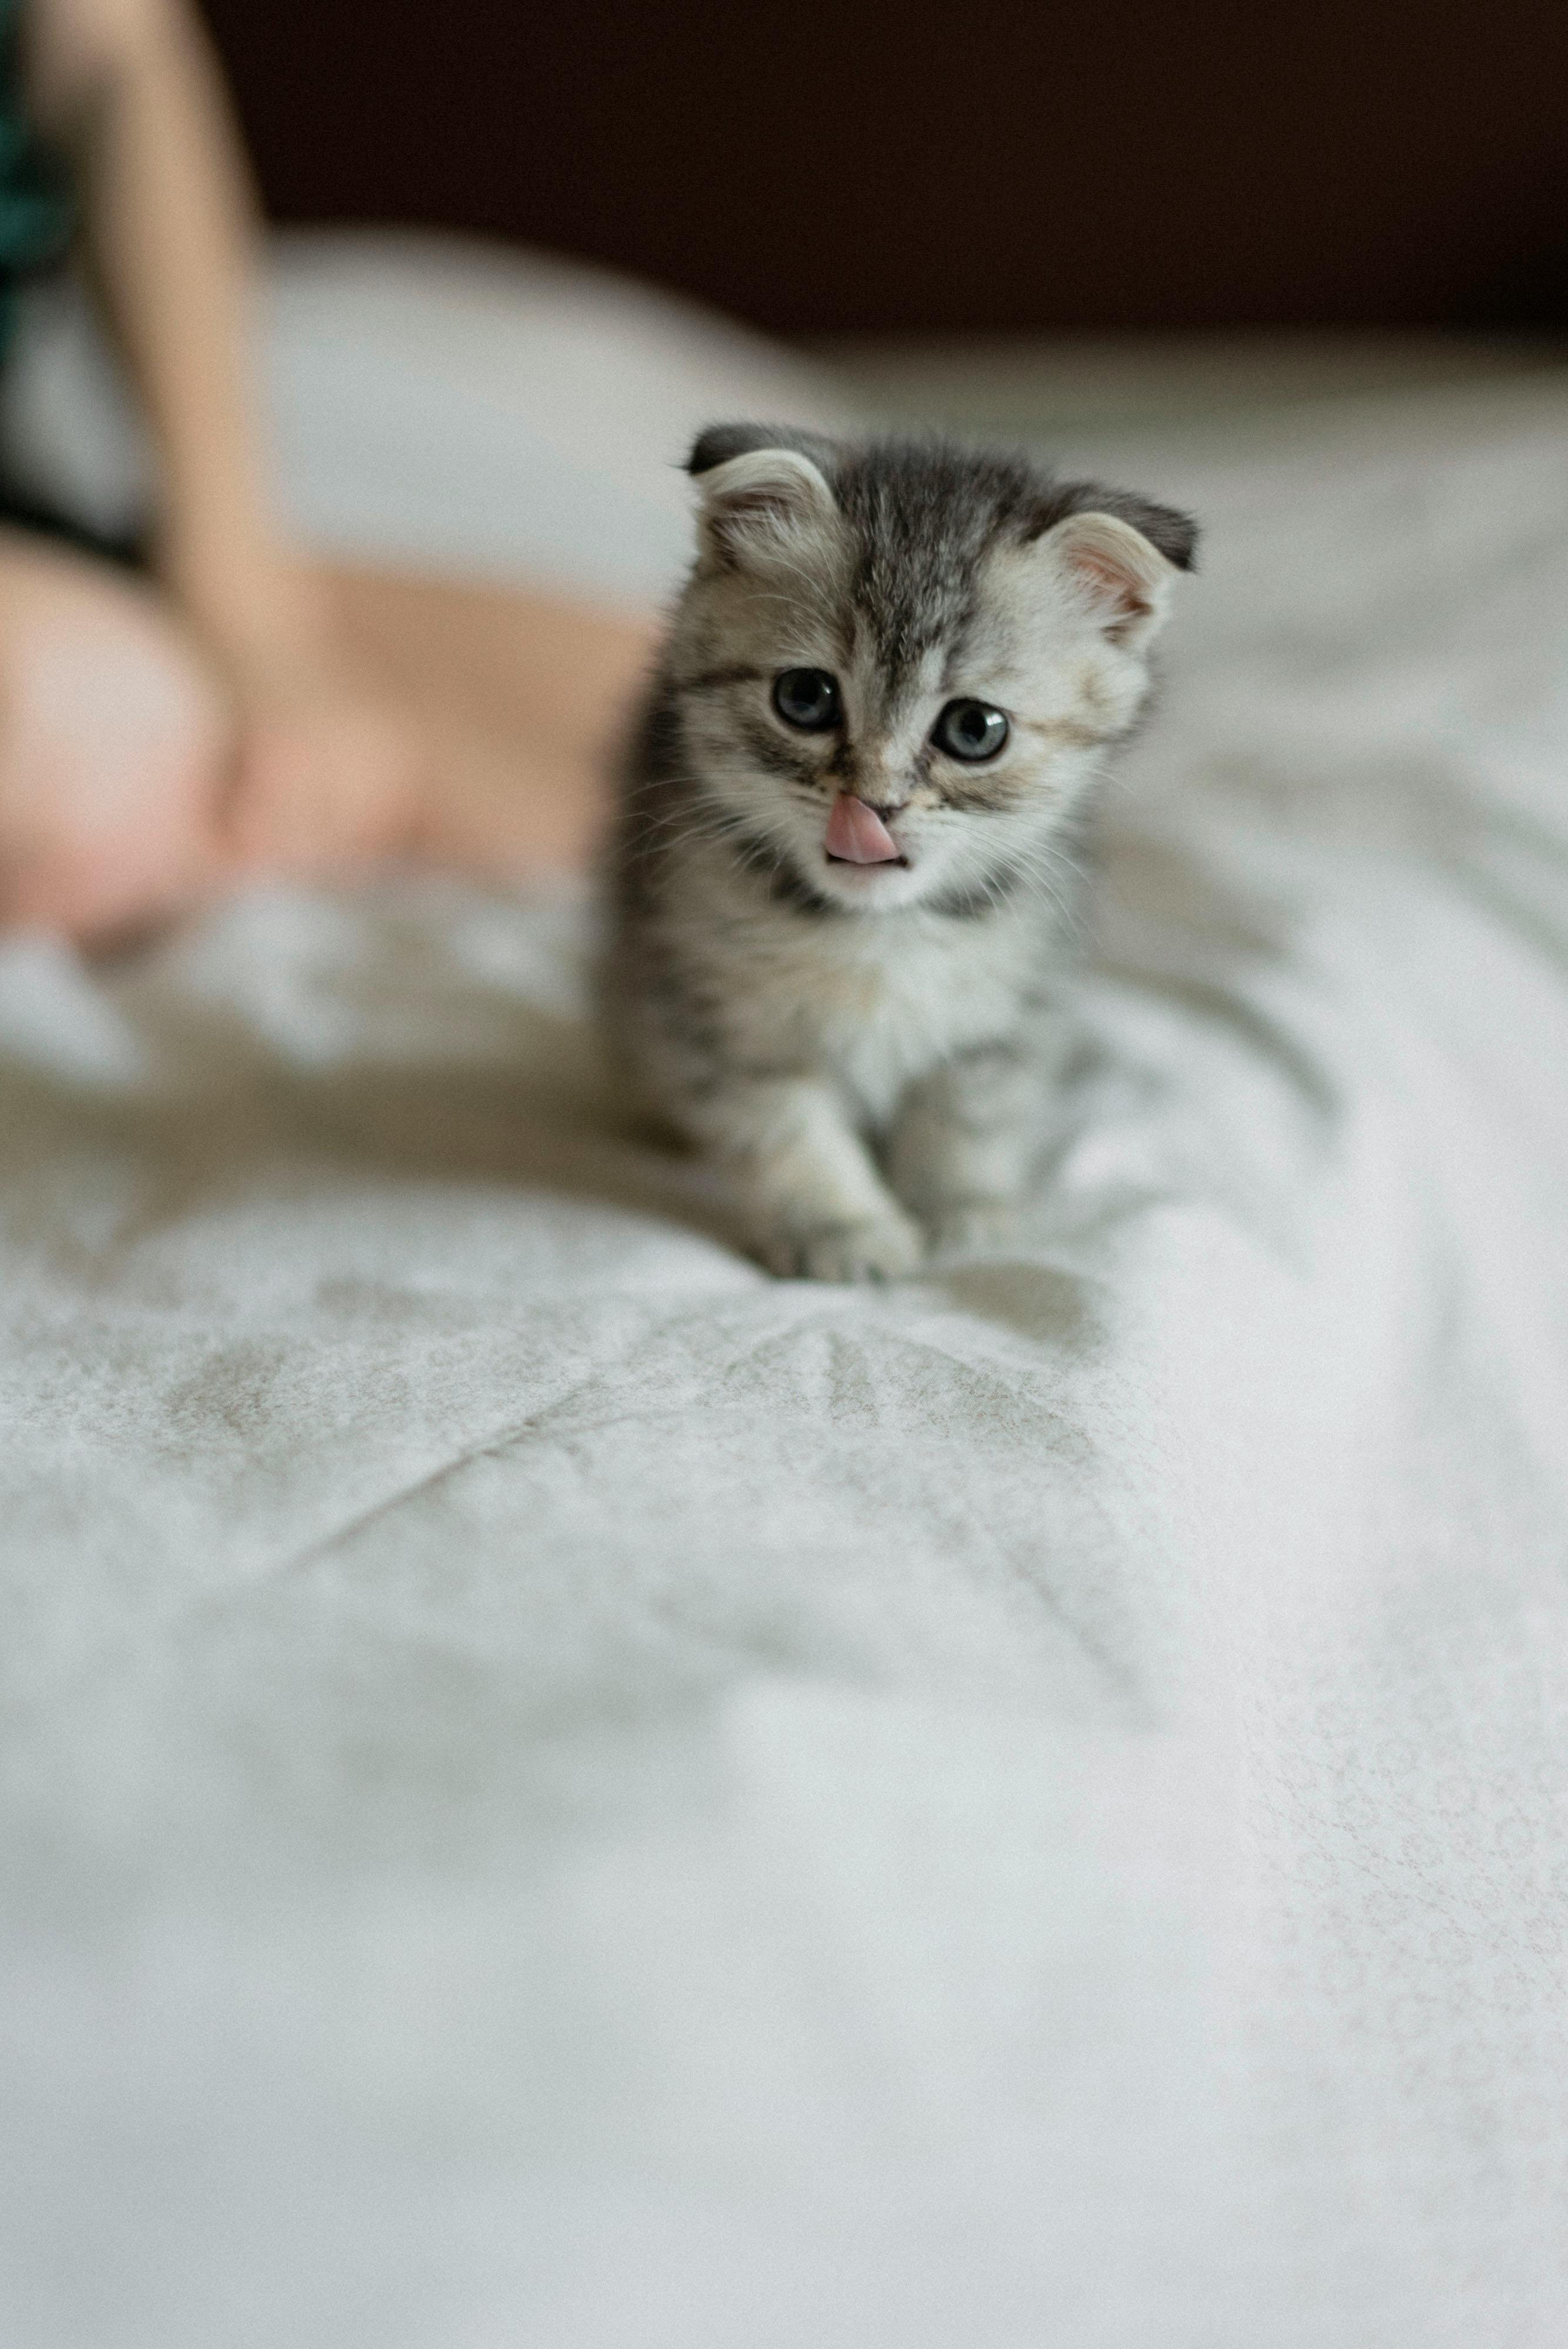 Cute Little Kitten with Gray Fur in Bed · Free Stock Photo